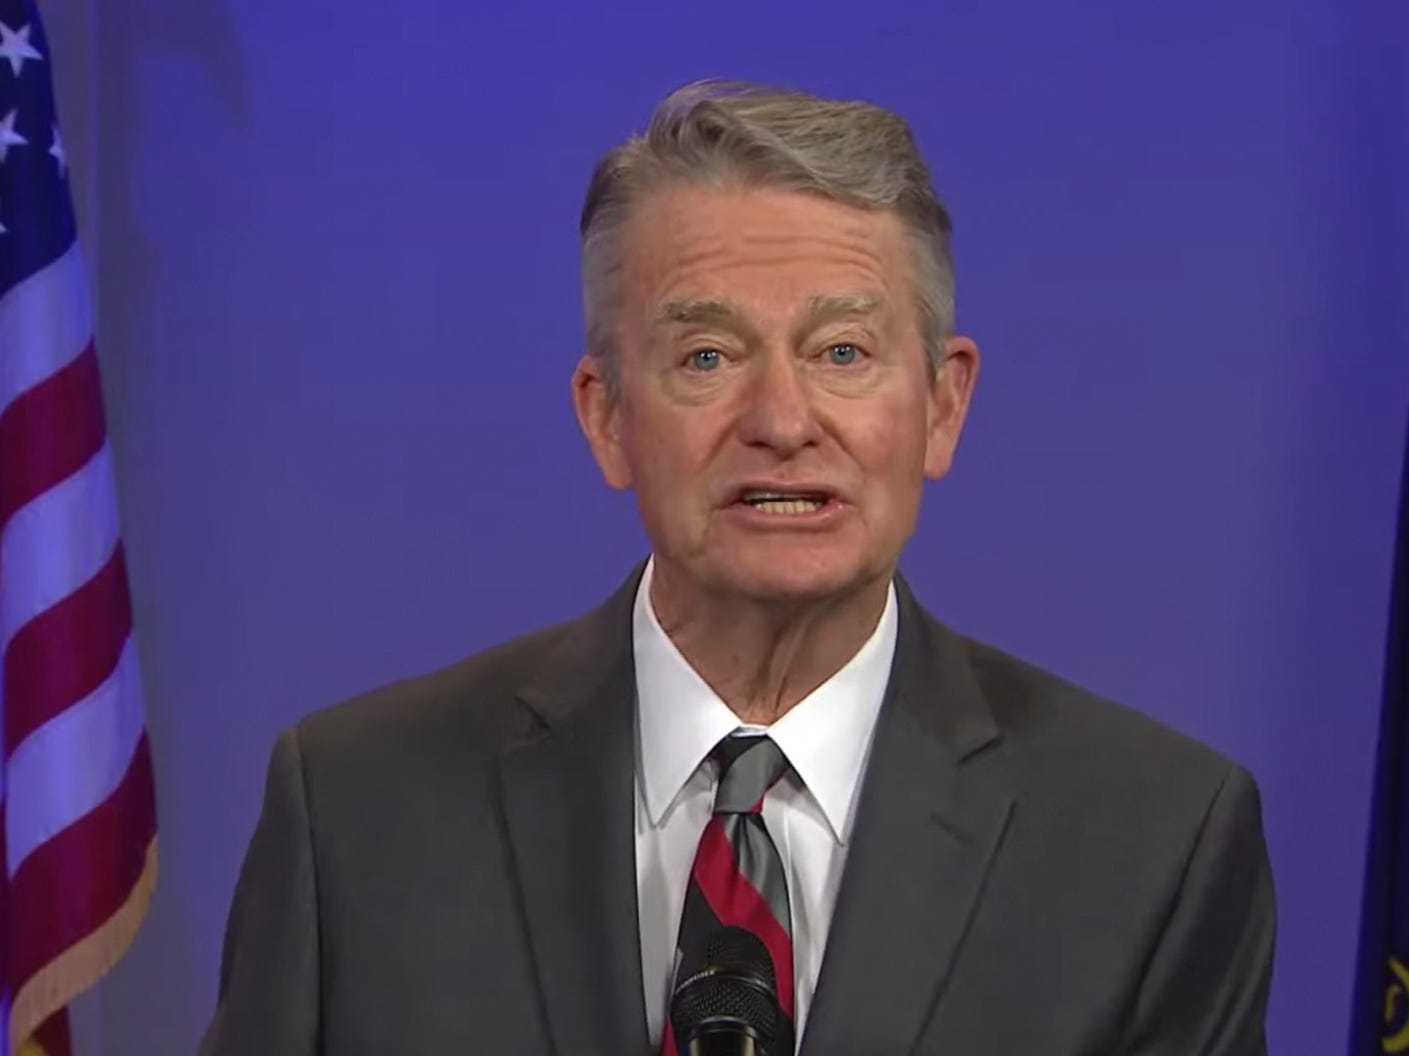 Idaho Gov. Brad Little in a suit and tie speaks to the camera